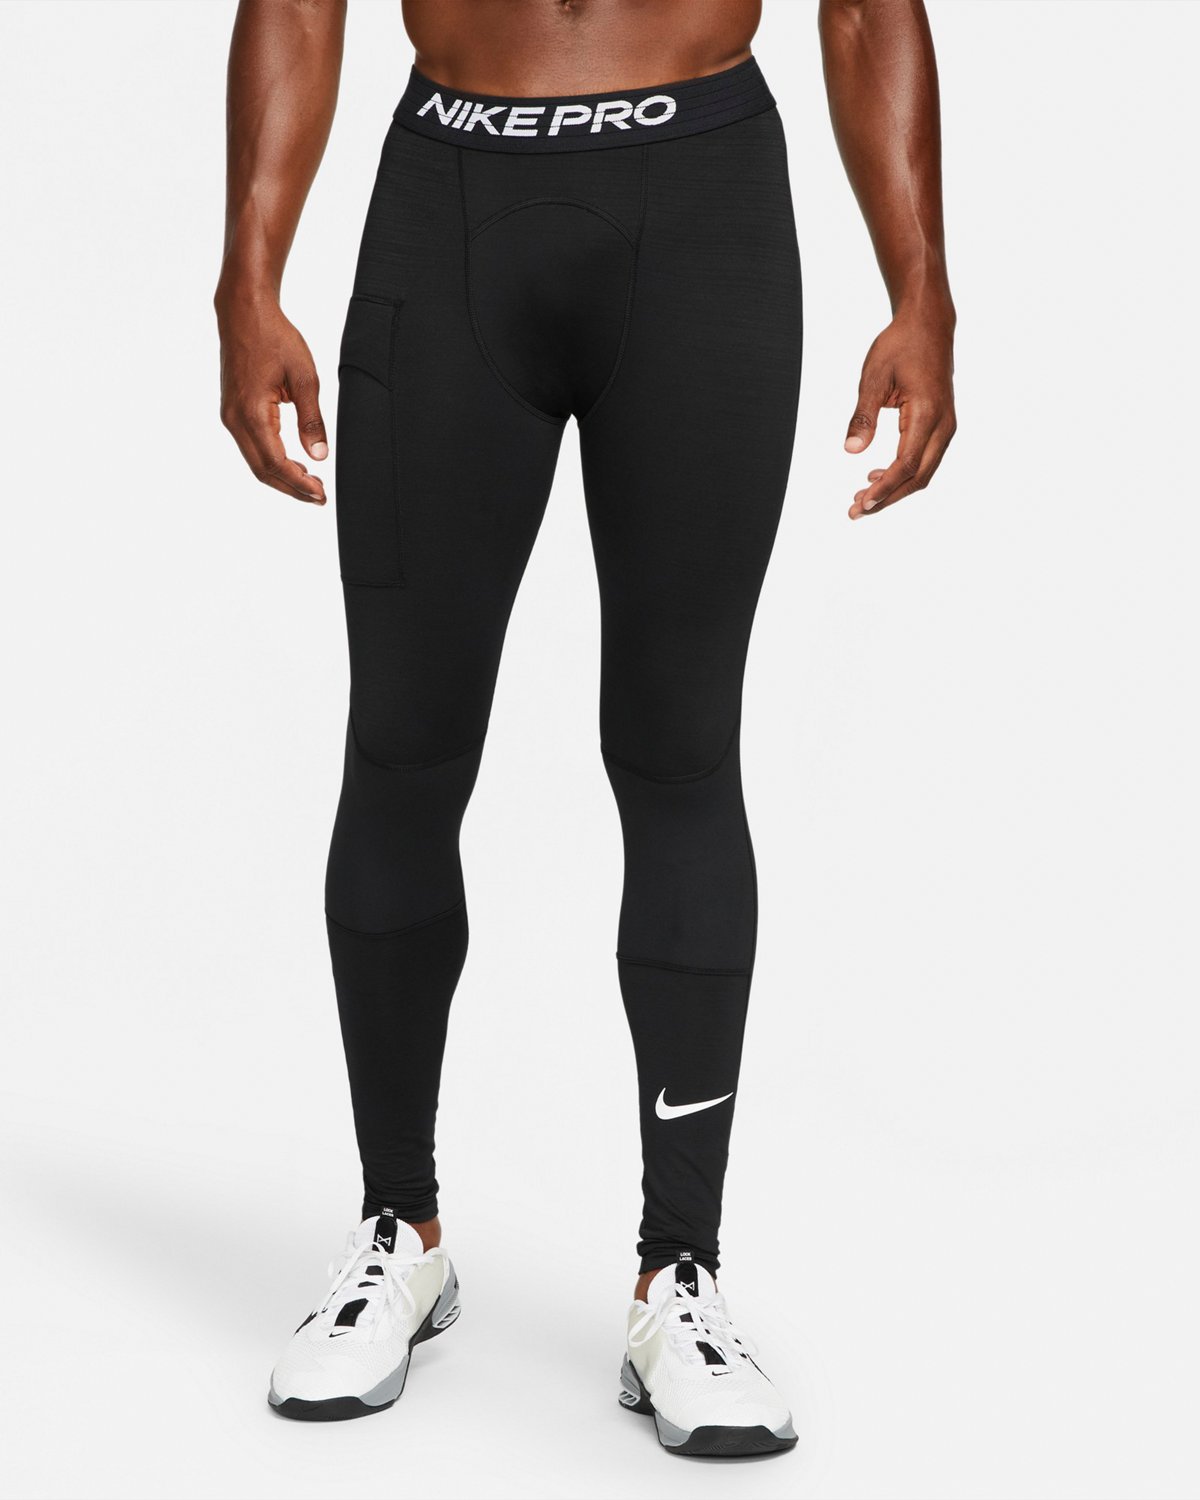 klei Silicium Luxe Nike Men's Pro Dri-FIT Warm Tights | Academy